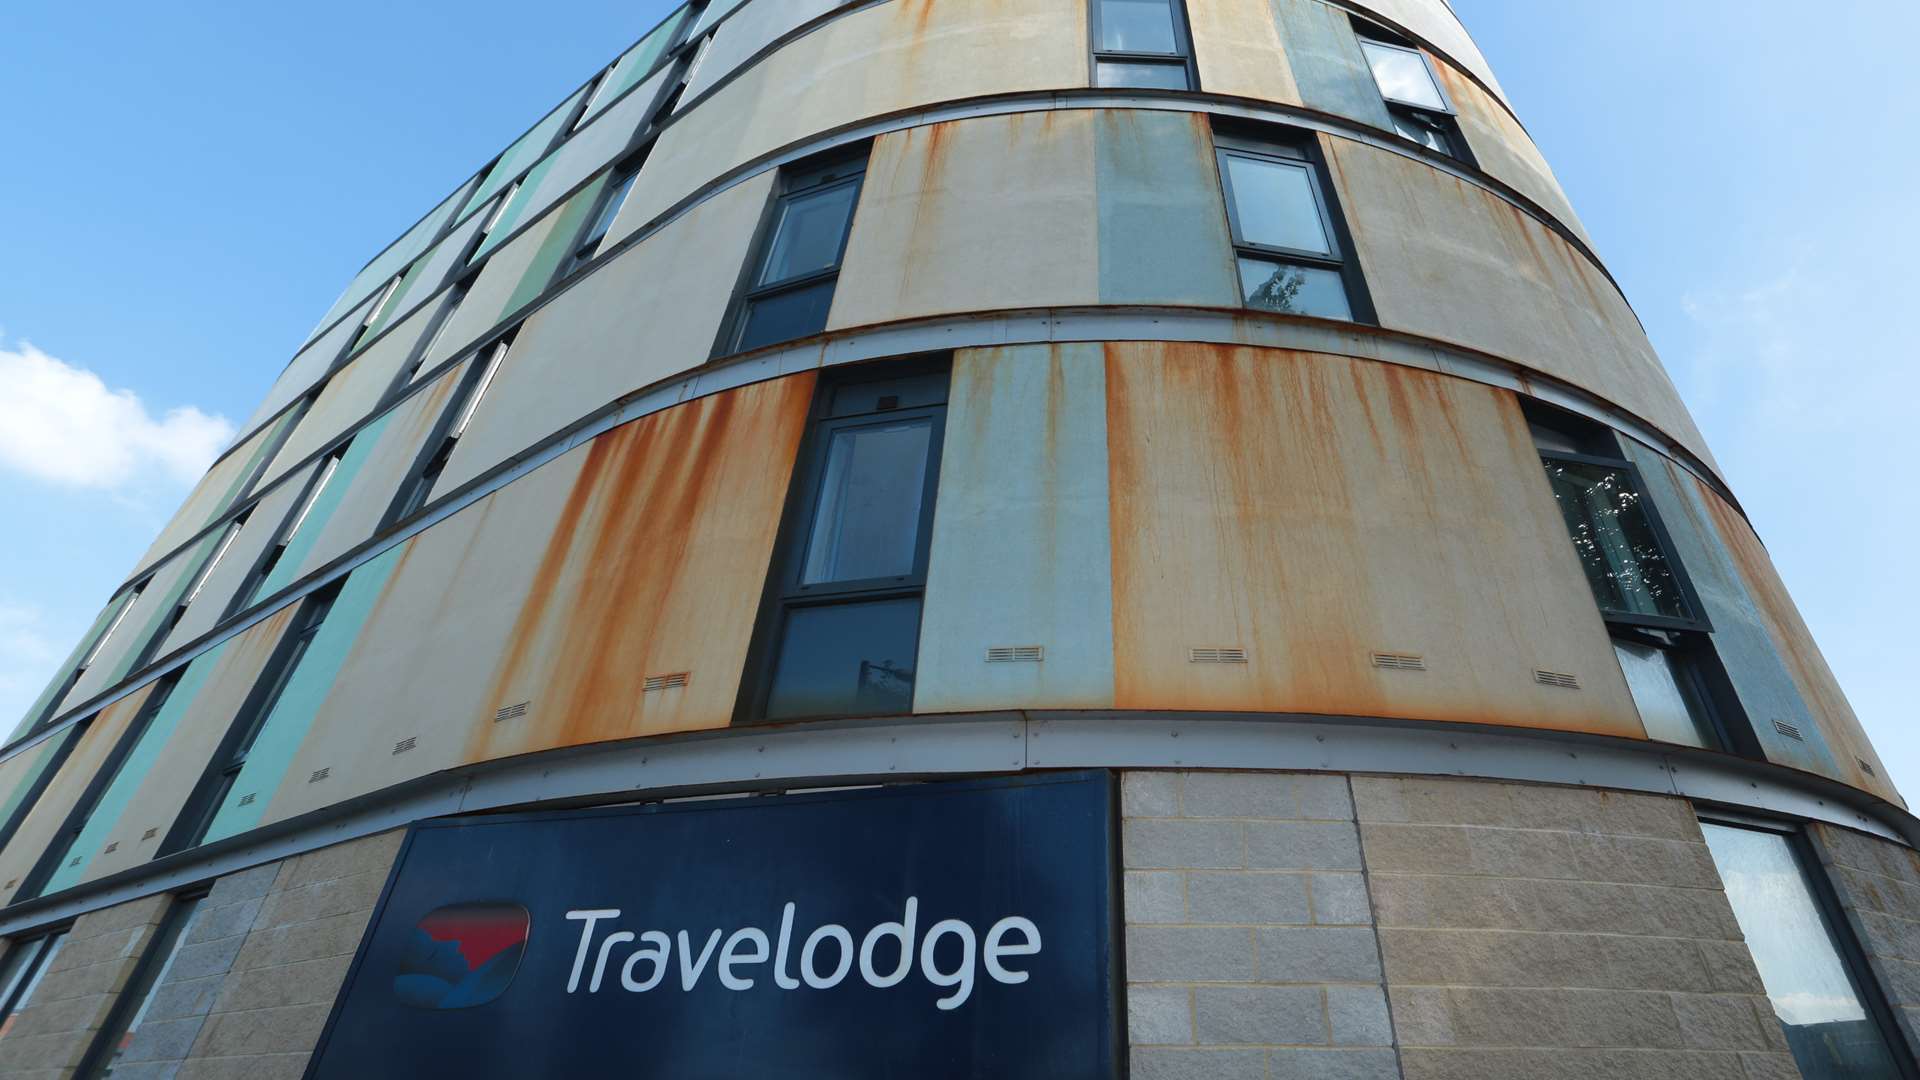 The Travelodge in Maidstone and its offending rust stains